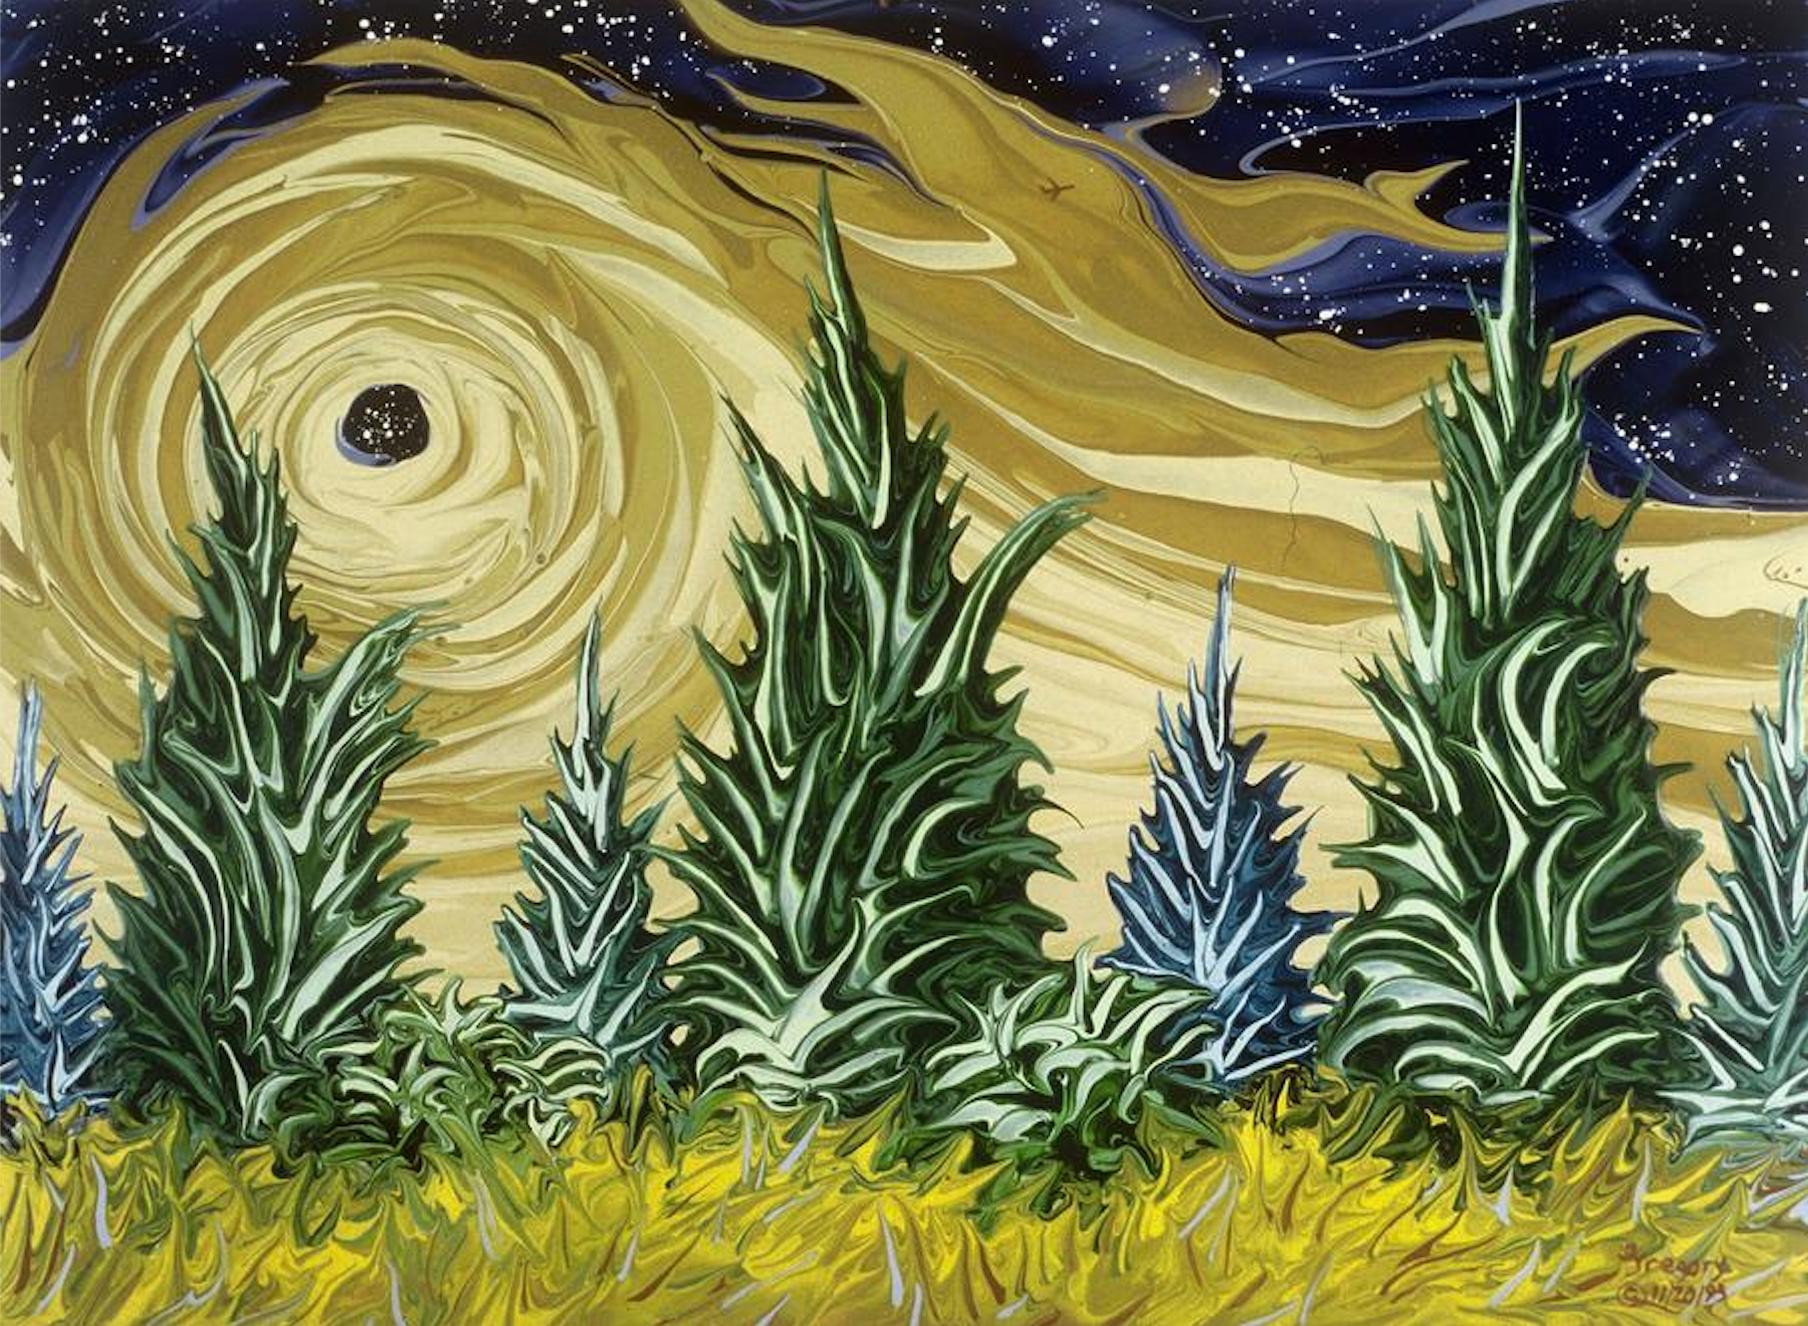 Gregory Horndeski Landscape Painting - Yellow Ochre Sky with Black Hole Over Wheatfield